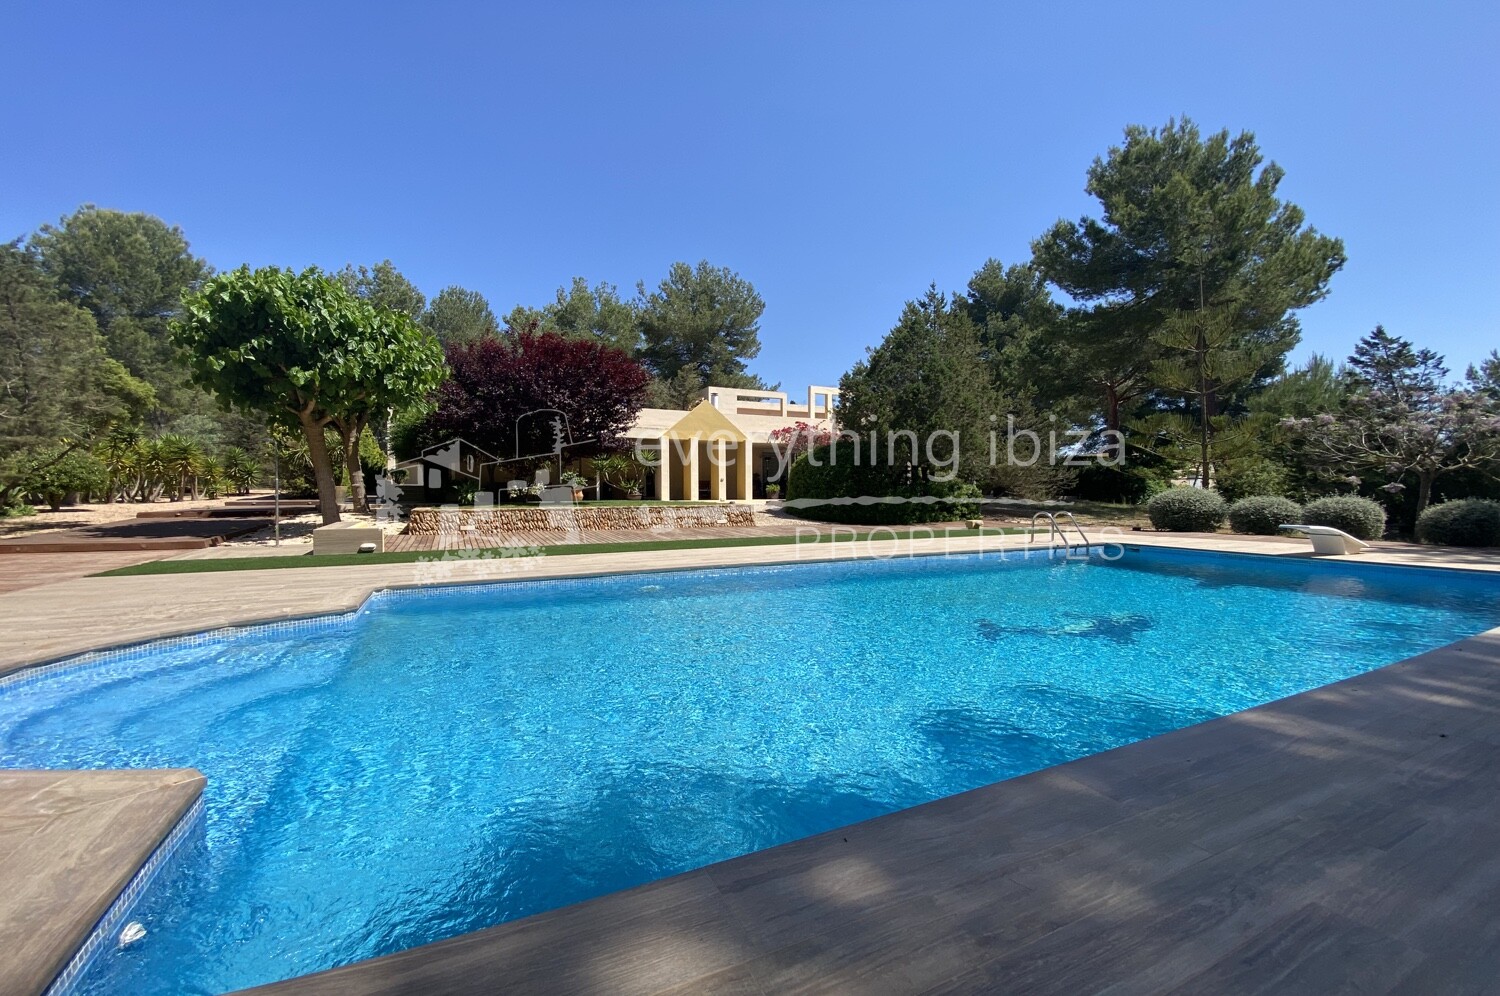 Elegant Villa Set in Large Country Plot Yet Close to Ibiza, ref. 1458, for sale in Ibiza by everything ibiza Properties